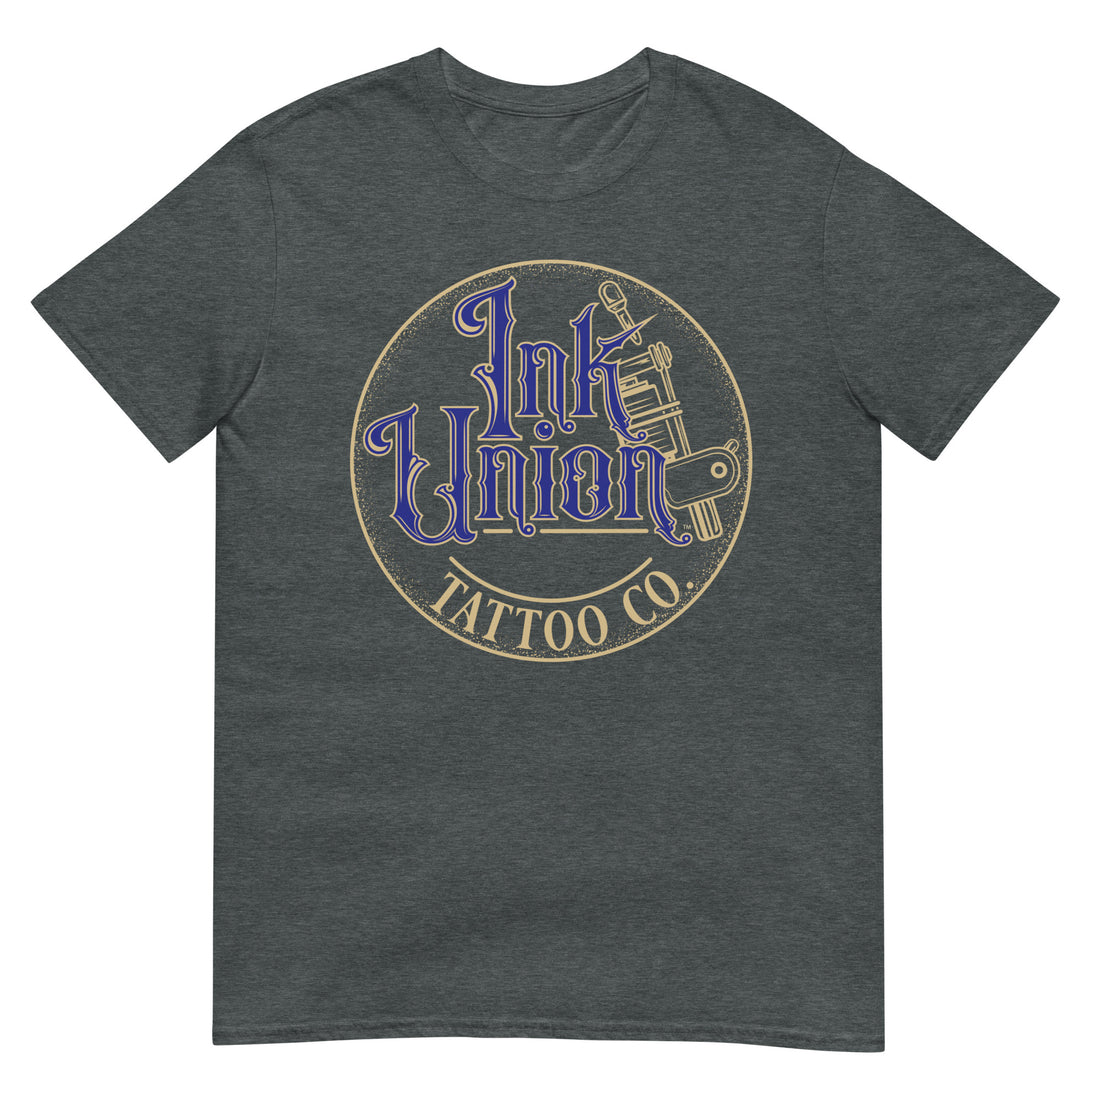 A dark grey t-shirt with a gold circle containing fancy lettering in blue and gold that says Ink Union and a gold tattoo machine peeking out from behind on the right side. There is a dot work gradient inside the circle, and the words Tattoo Co. in gold are at the bottom of the design.